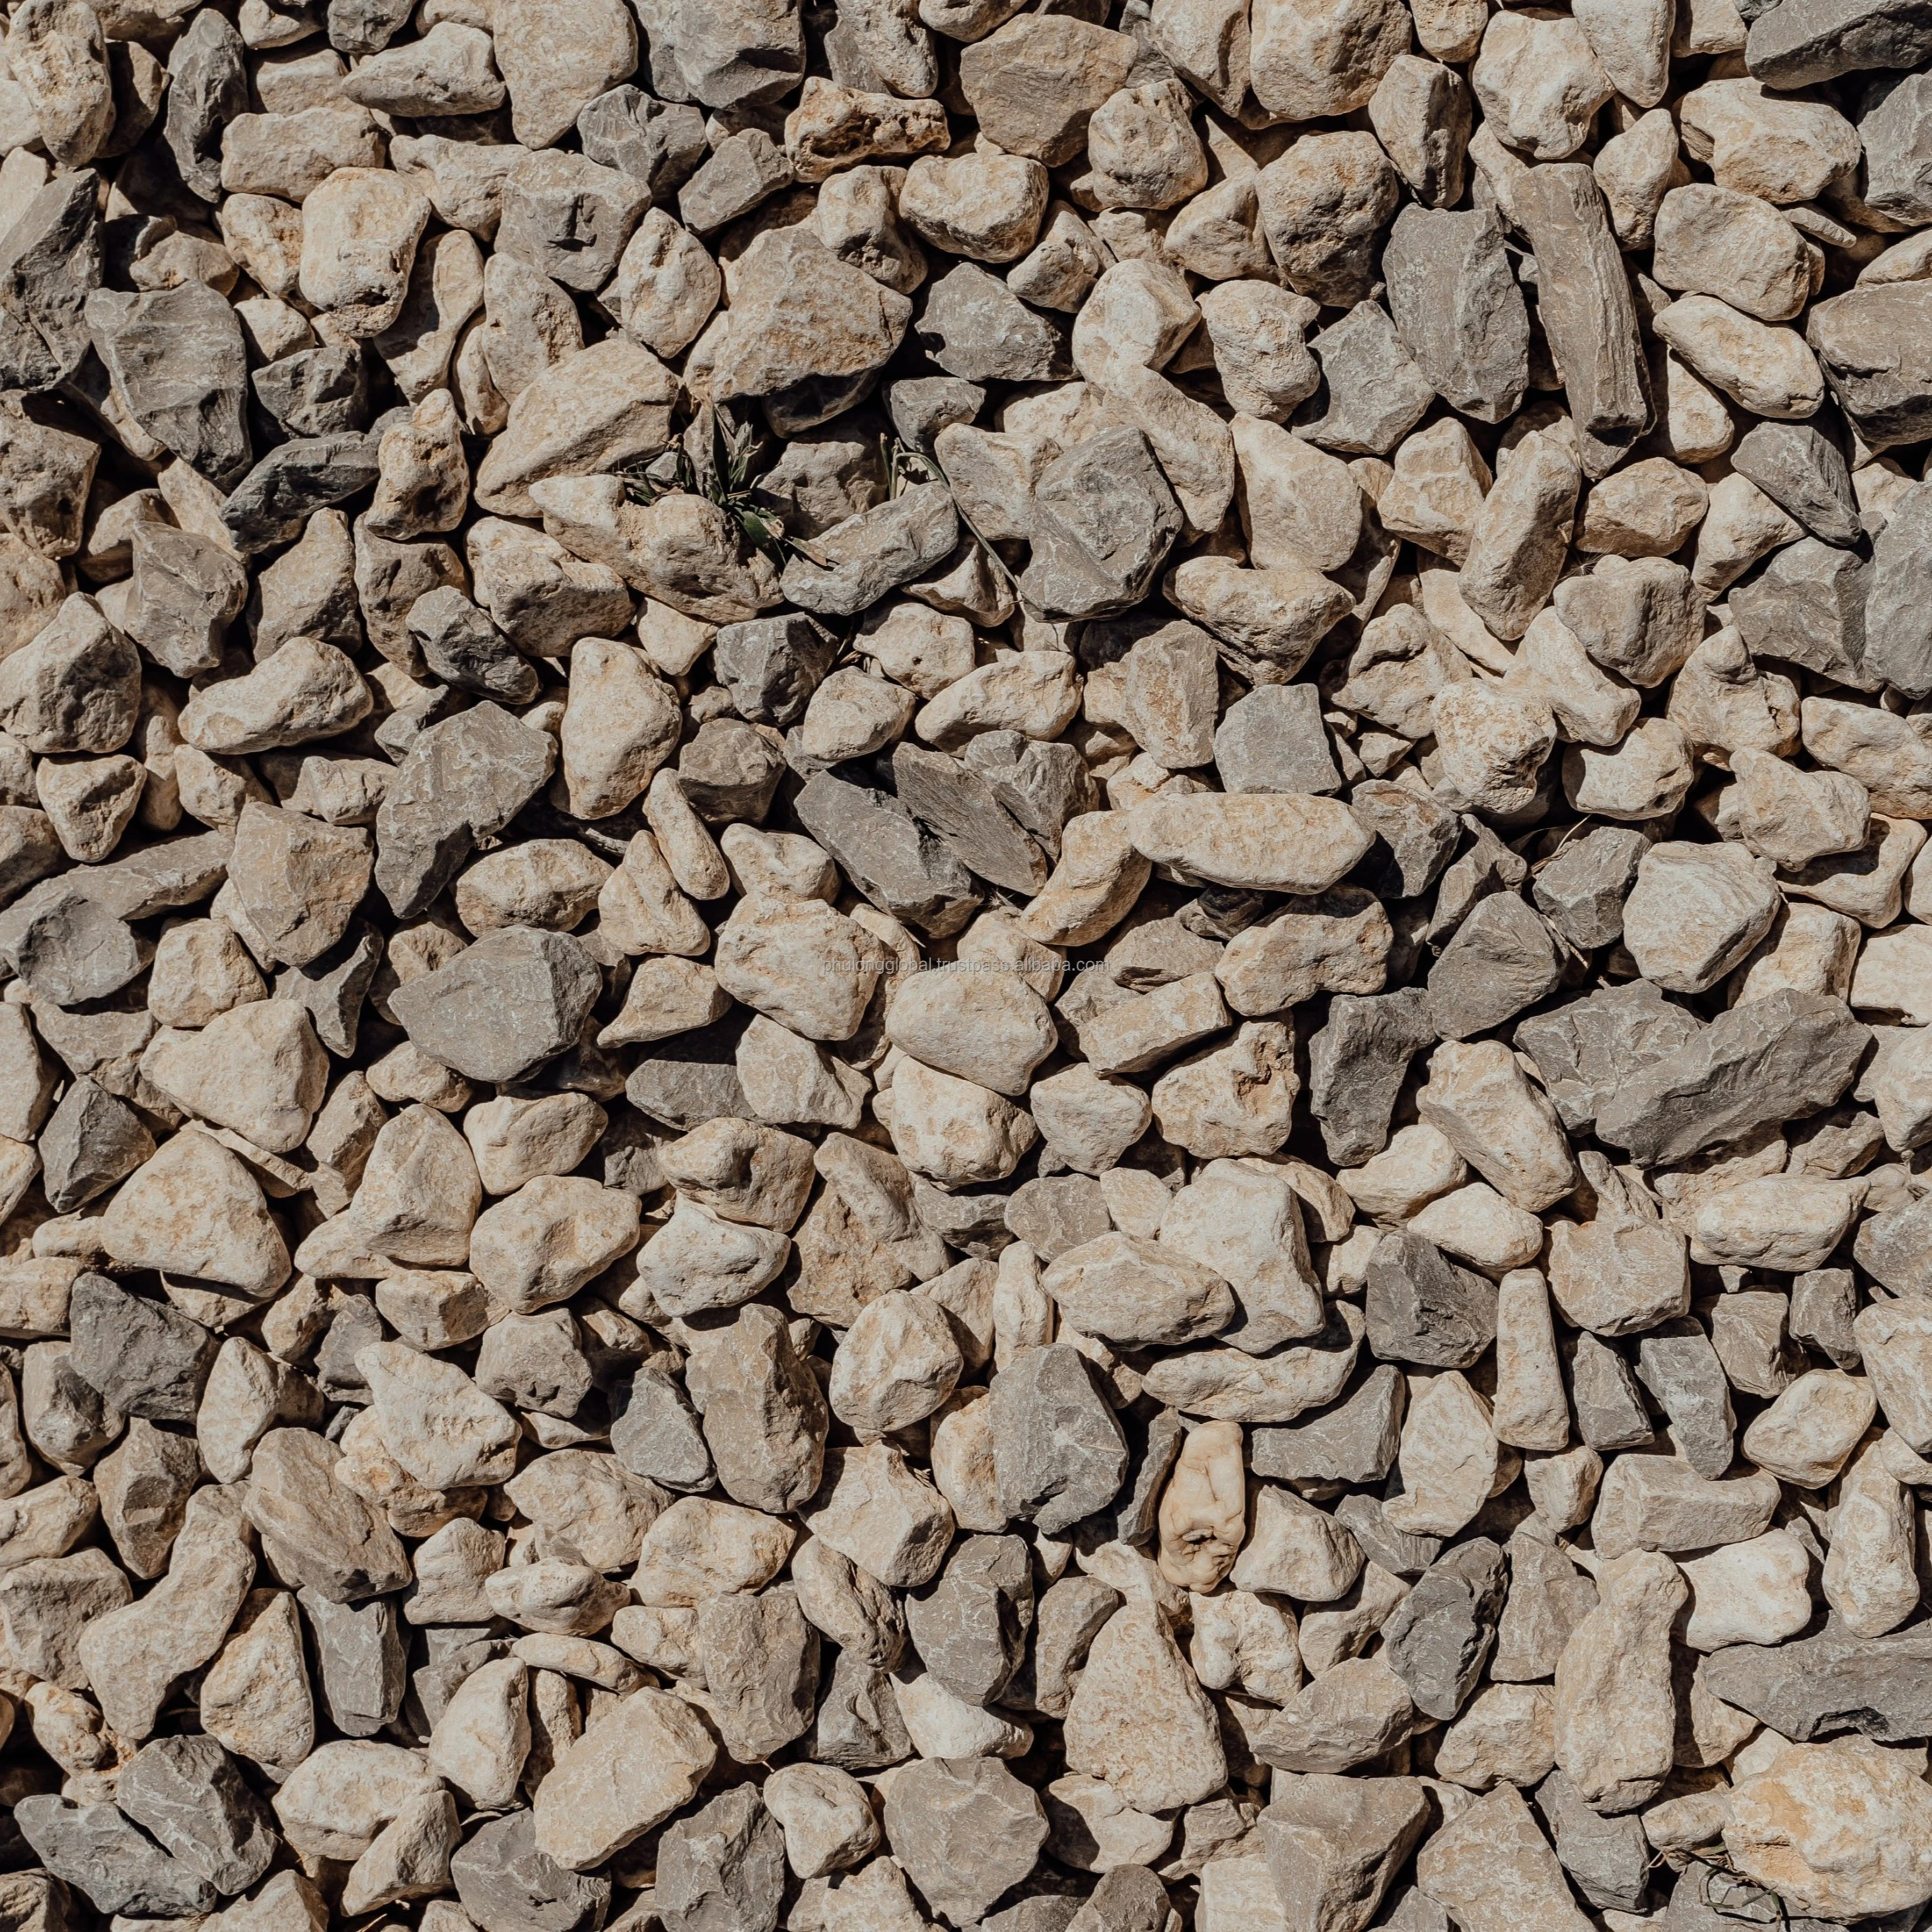 Stone for building Stone chips, Aggregate or gravel crushed stone with size 10mm, 20mm, 45mm, 60mm synthetic stone